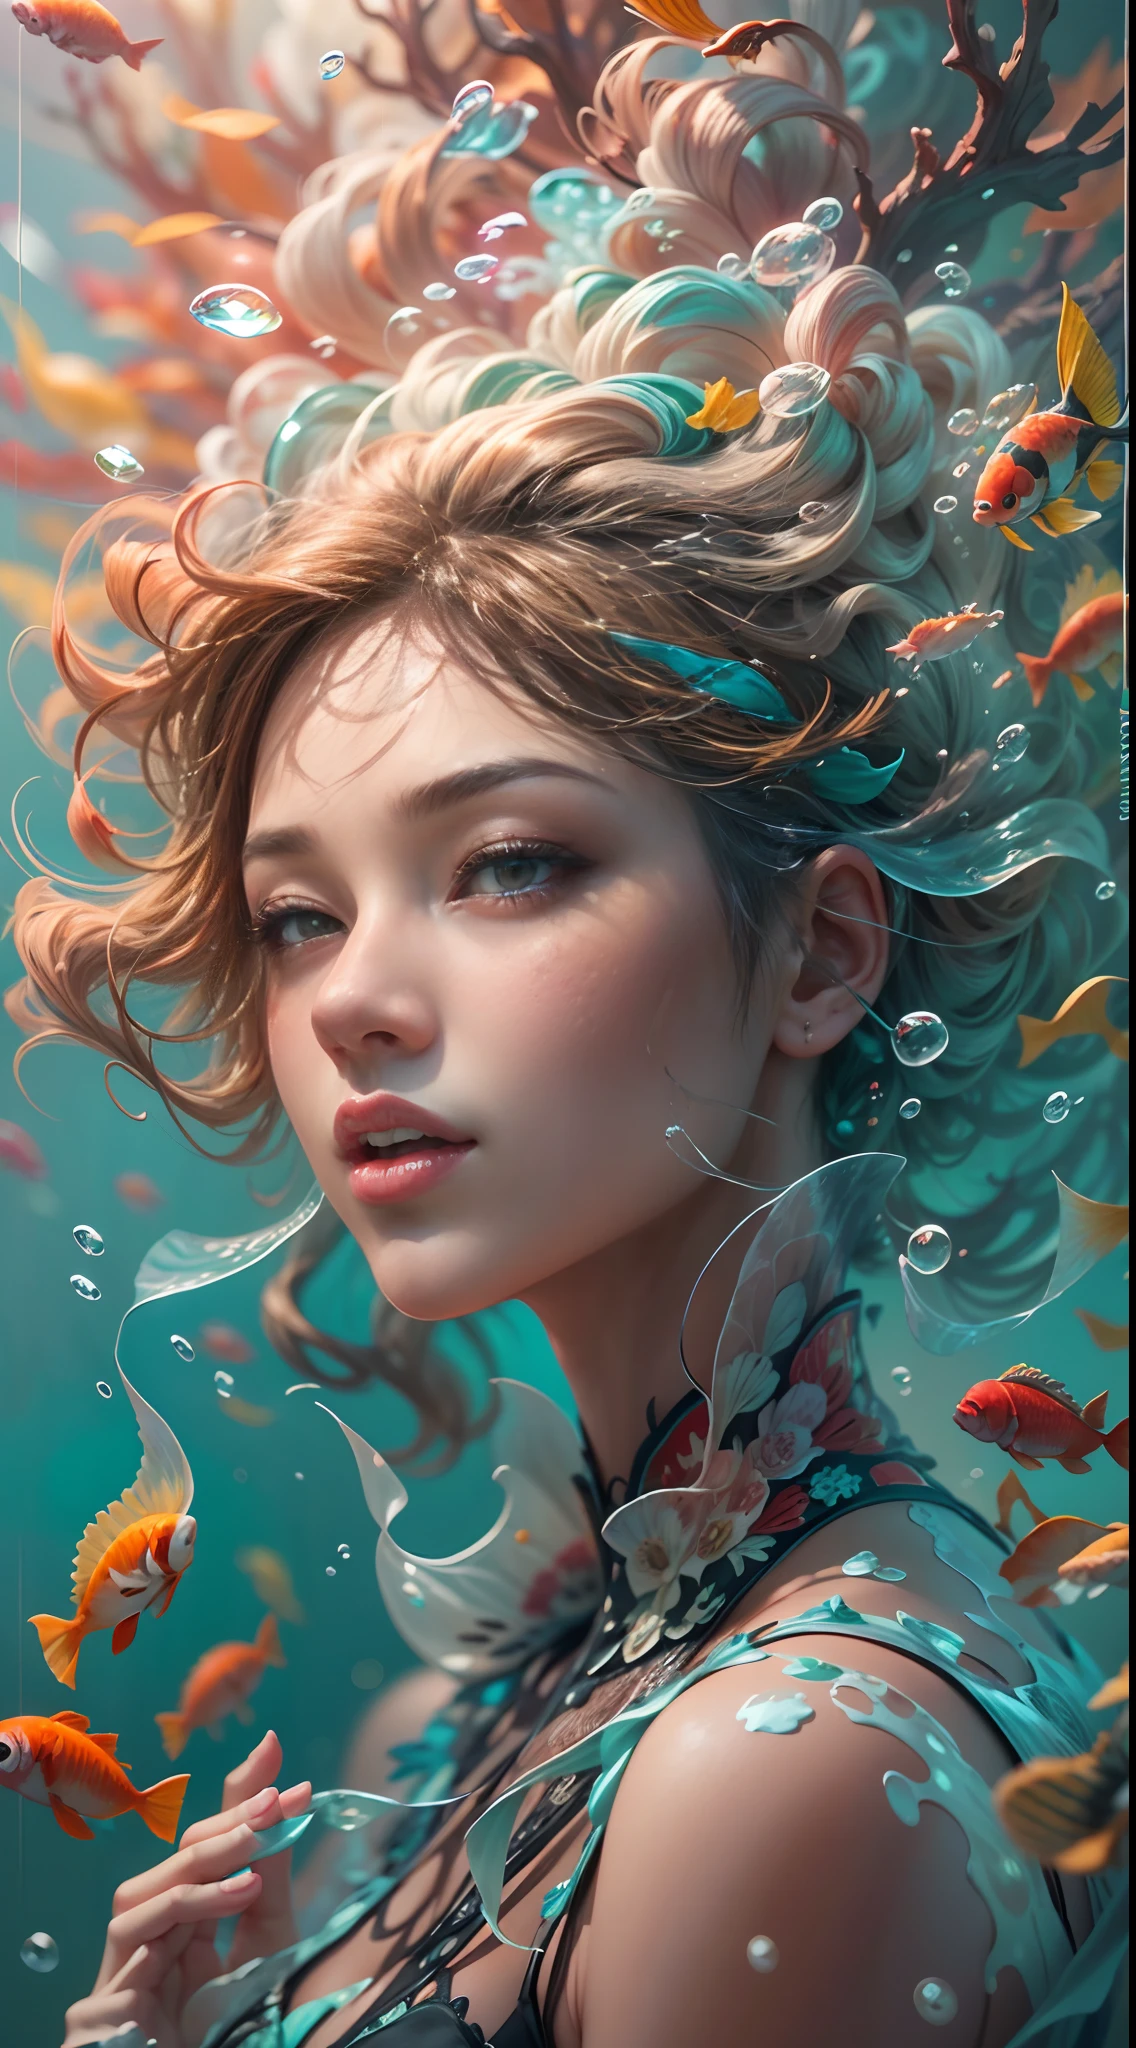 modelshoot style, (extremely detailed CG unit 8k wallpaper), A chaotic storm of intricate liquid smoke in the head, Stylized abstract portrait of pretty, skin wet,Koi，Koi bonito，Bandos de koi,carp，Strangely shaped corals，Ocean floor，Beautiful coral reef in the background，rockery,Marine life，colorful coral reef,Decorate with coral reefs,author：Petros Afshar, ross tran, Tom Baleia, peter mohrbacher, art germ, vidro quebrado, ((bubbly underwater scenery)) The octane rendering of radiant light is highly detailed, inspired by Yanjun Cheng, beautiful digital art, Guviz-style artwork, Highly detailed 8K digital art, Beautiful digital illustration, detailed digital art cute, stunning digital illustration, a beautiful artwork illustration, exquisite digital illustration,Detailed 8K digital art,